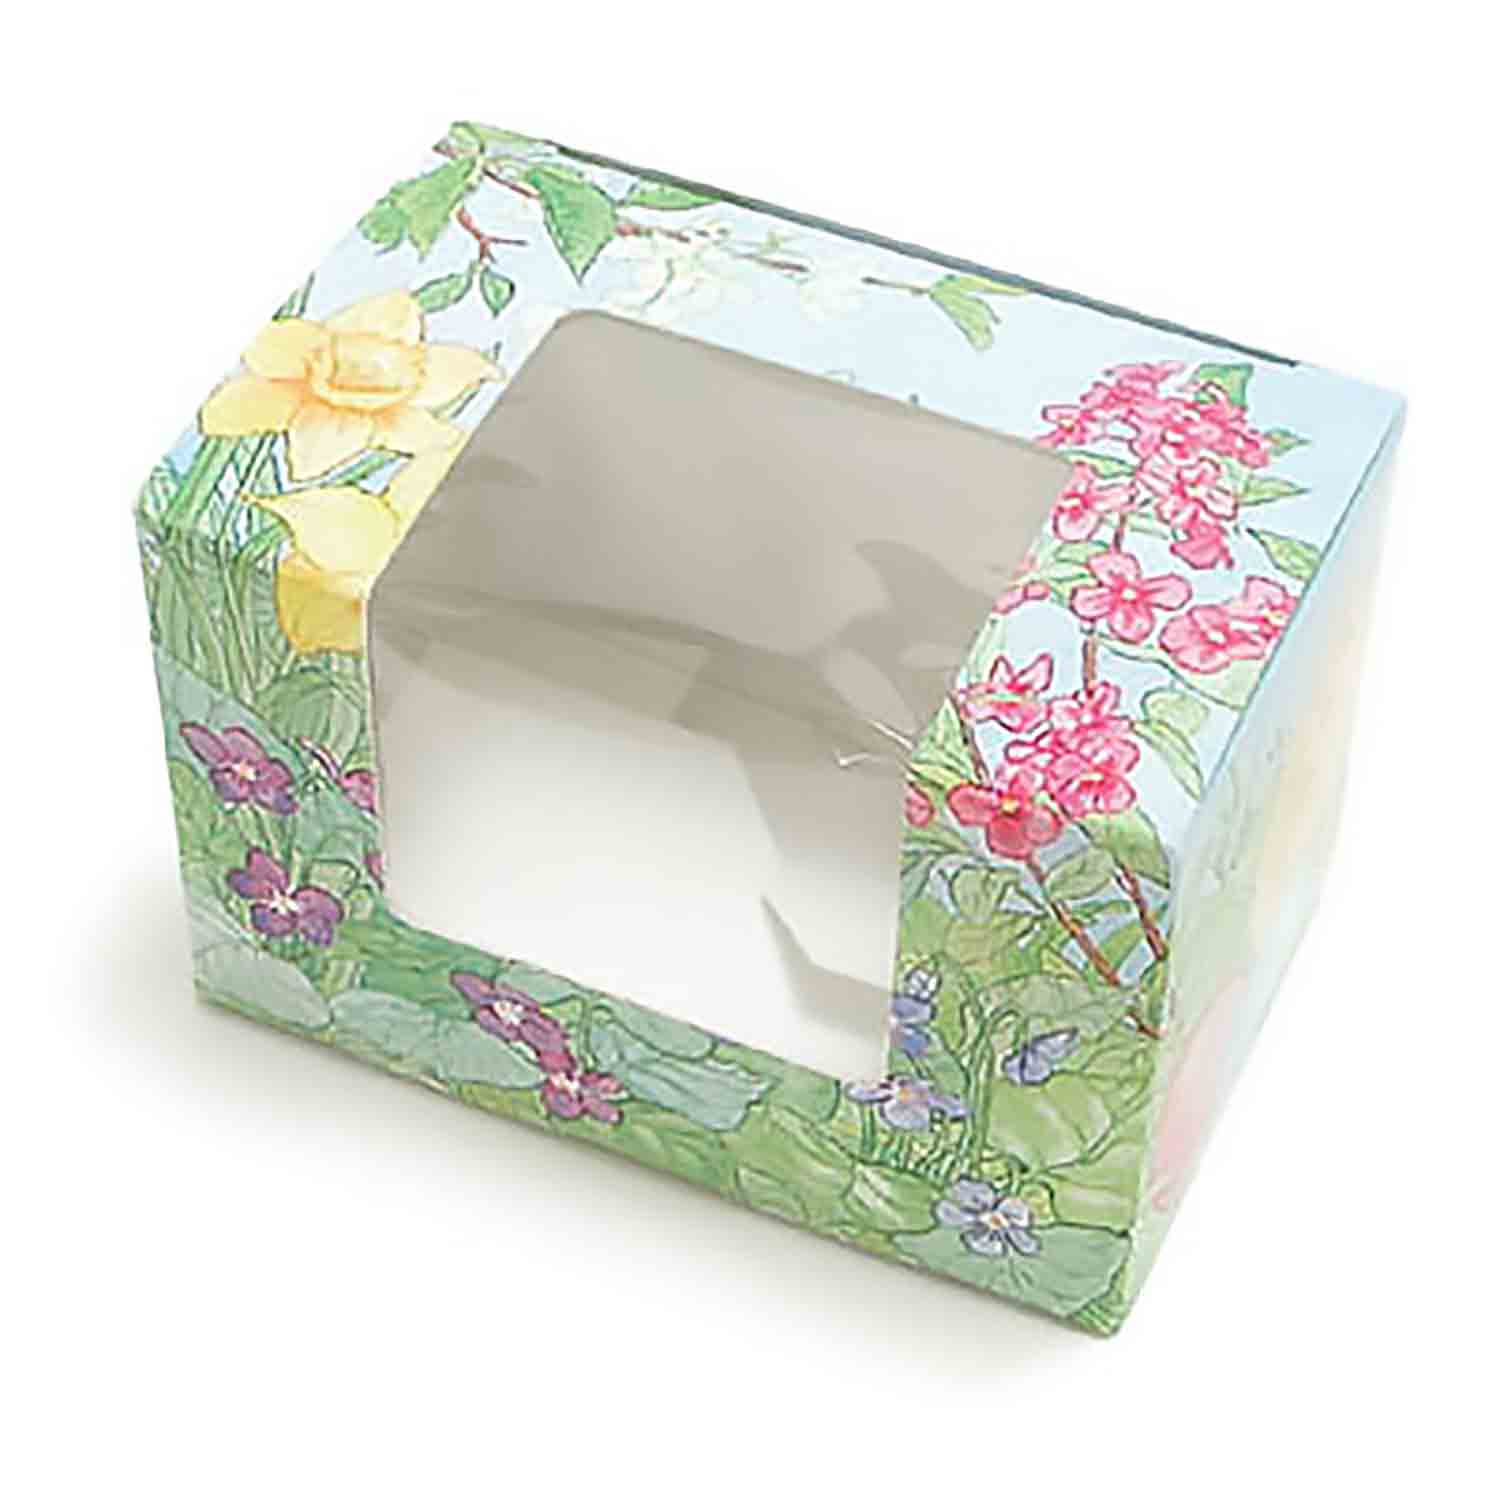 1/2 lb Easter Garden Egg Candy Box with Window